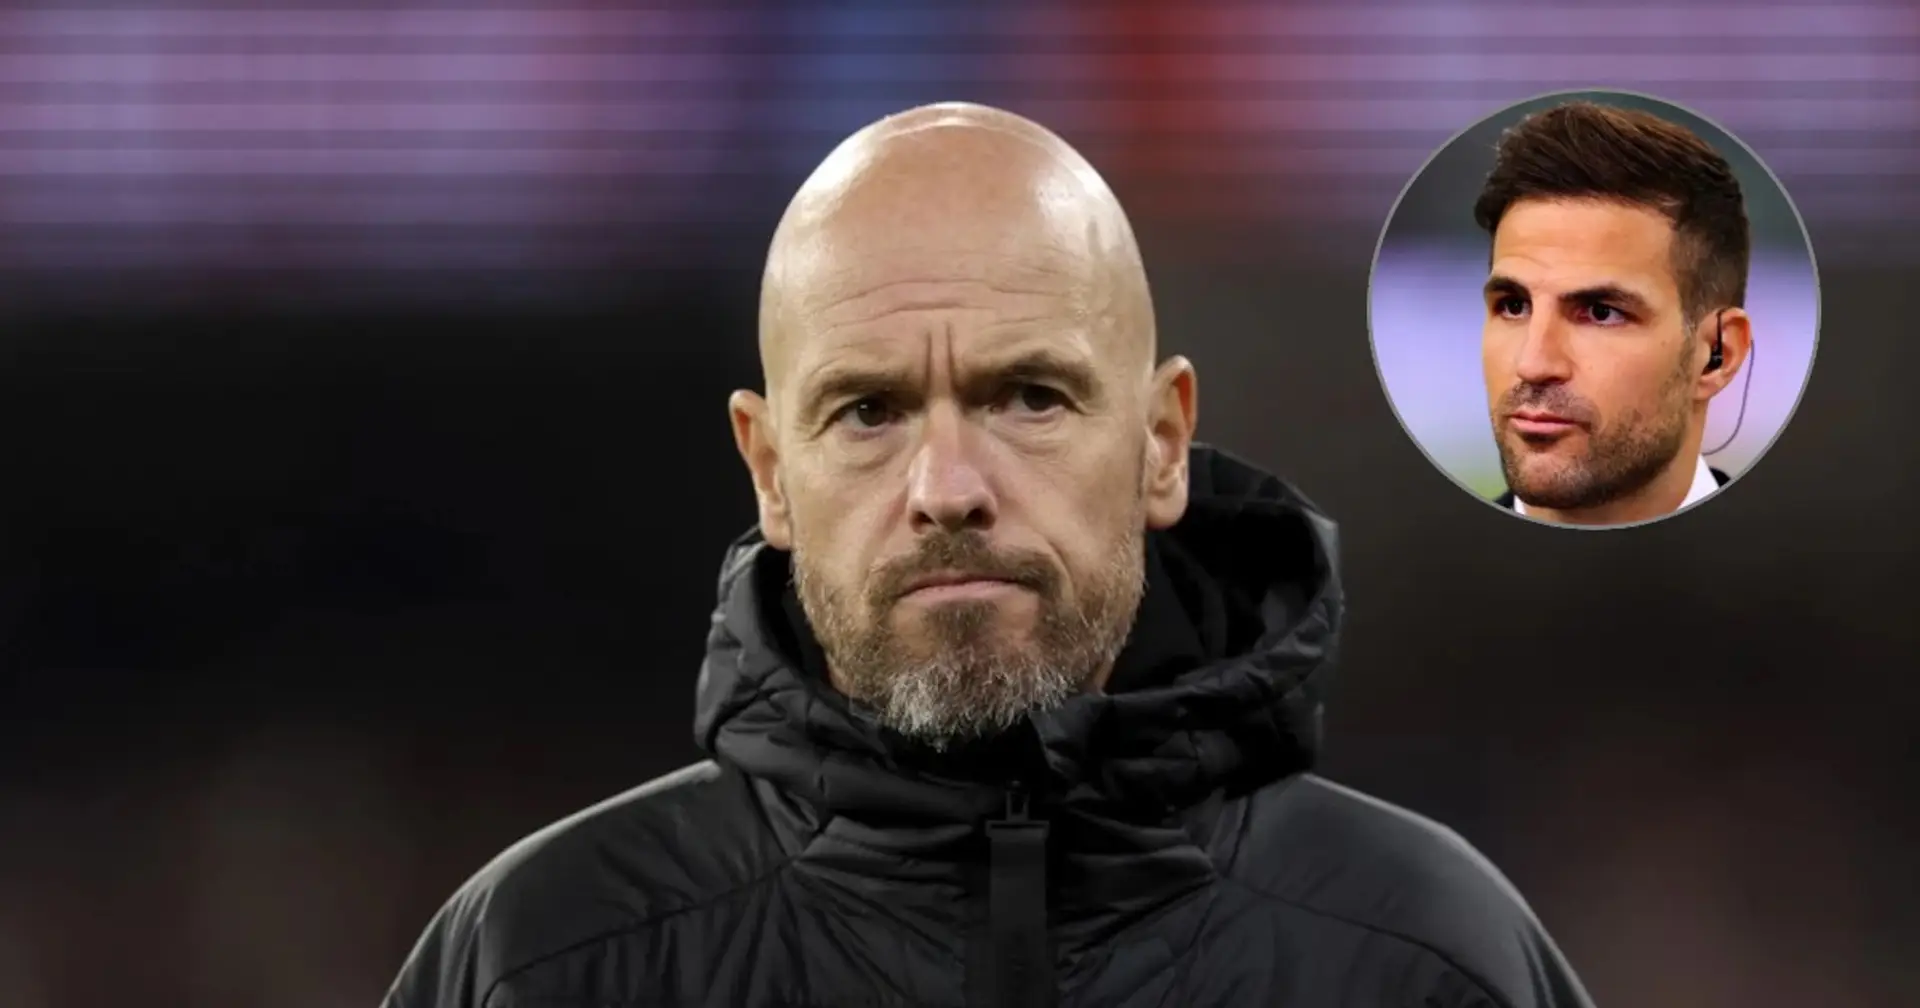 Fabregas on Ten Hag: 'I don't know his gameplan, I don't know if he has structure'